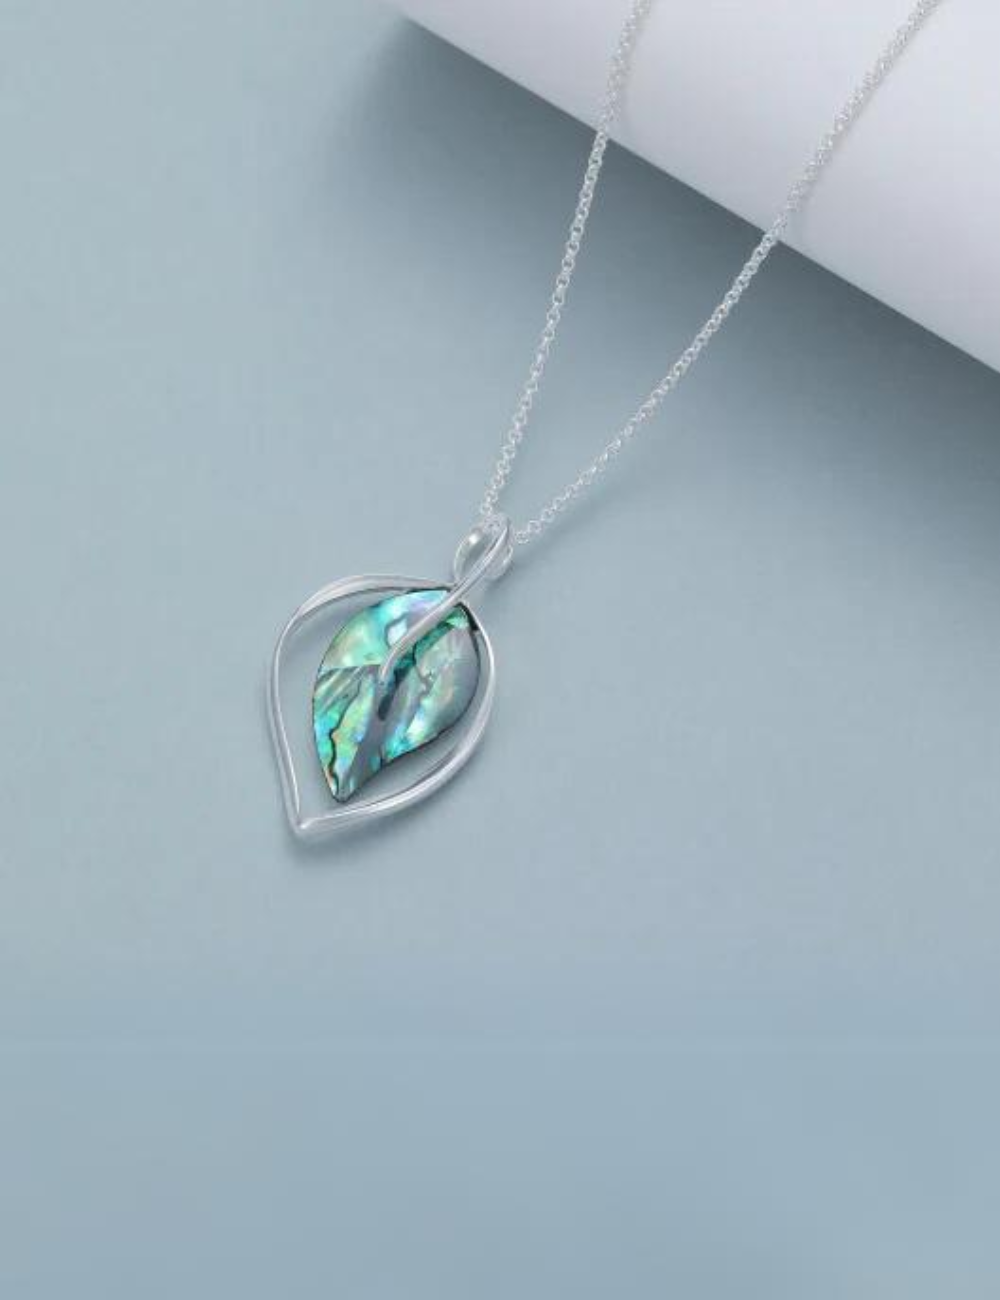 Necklace Silver Chain Mother OF Pearl Pendant